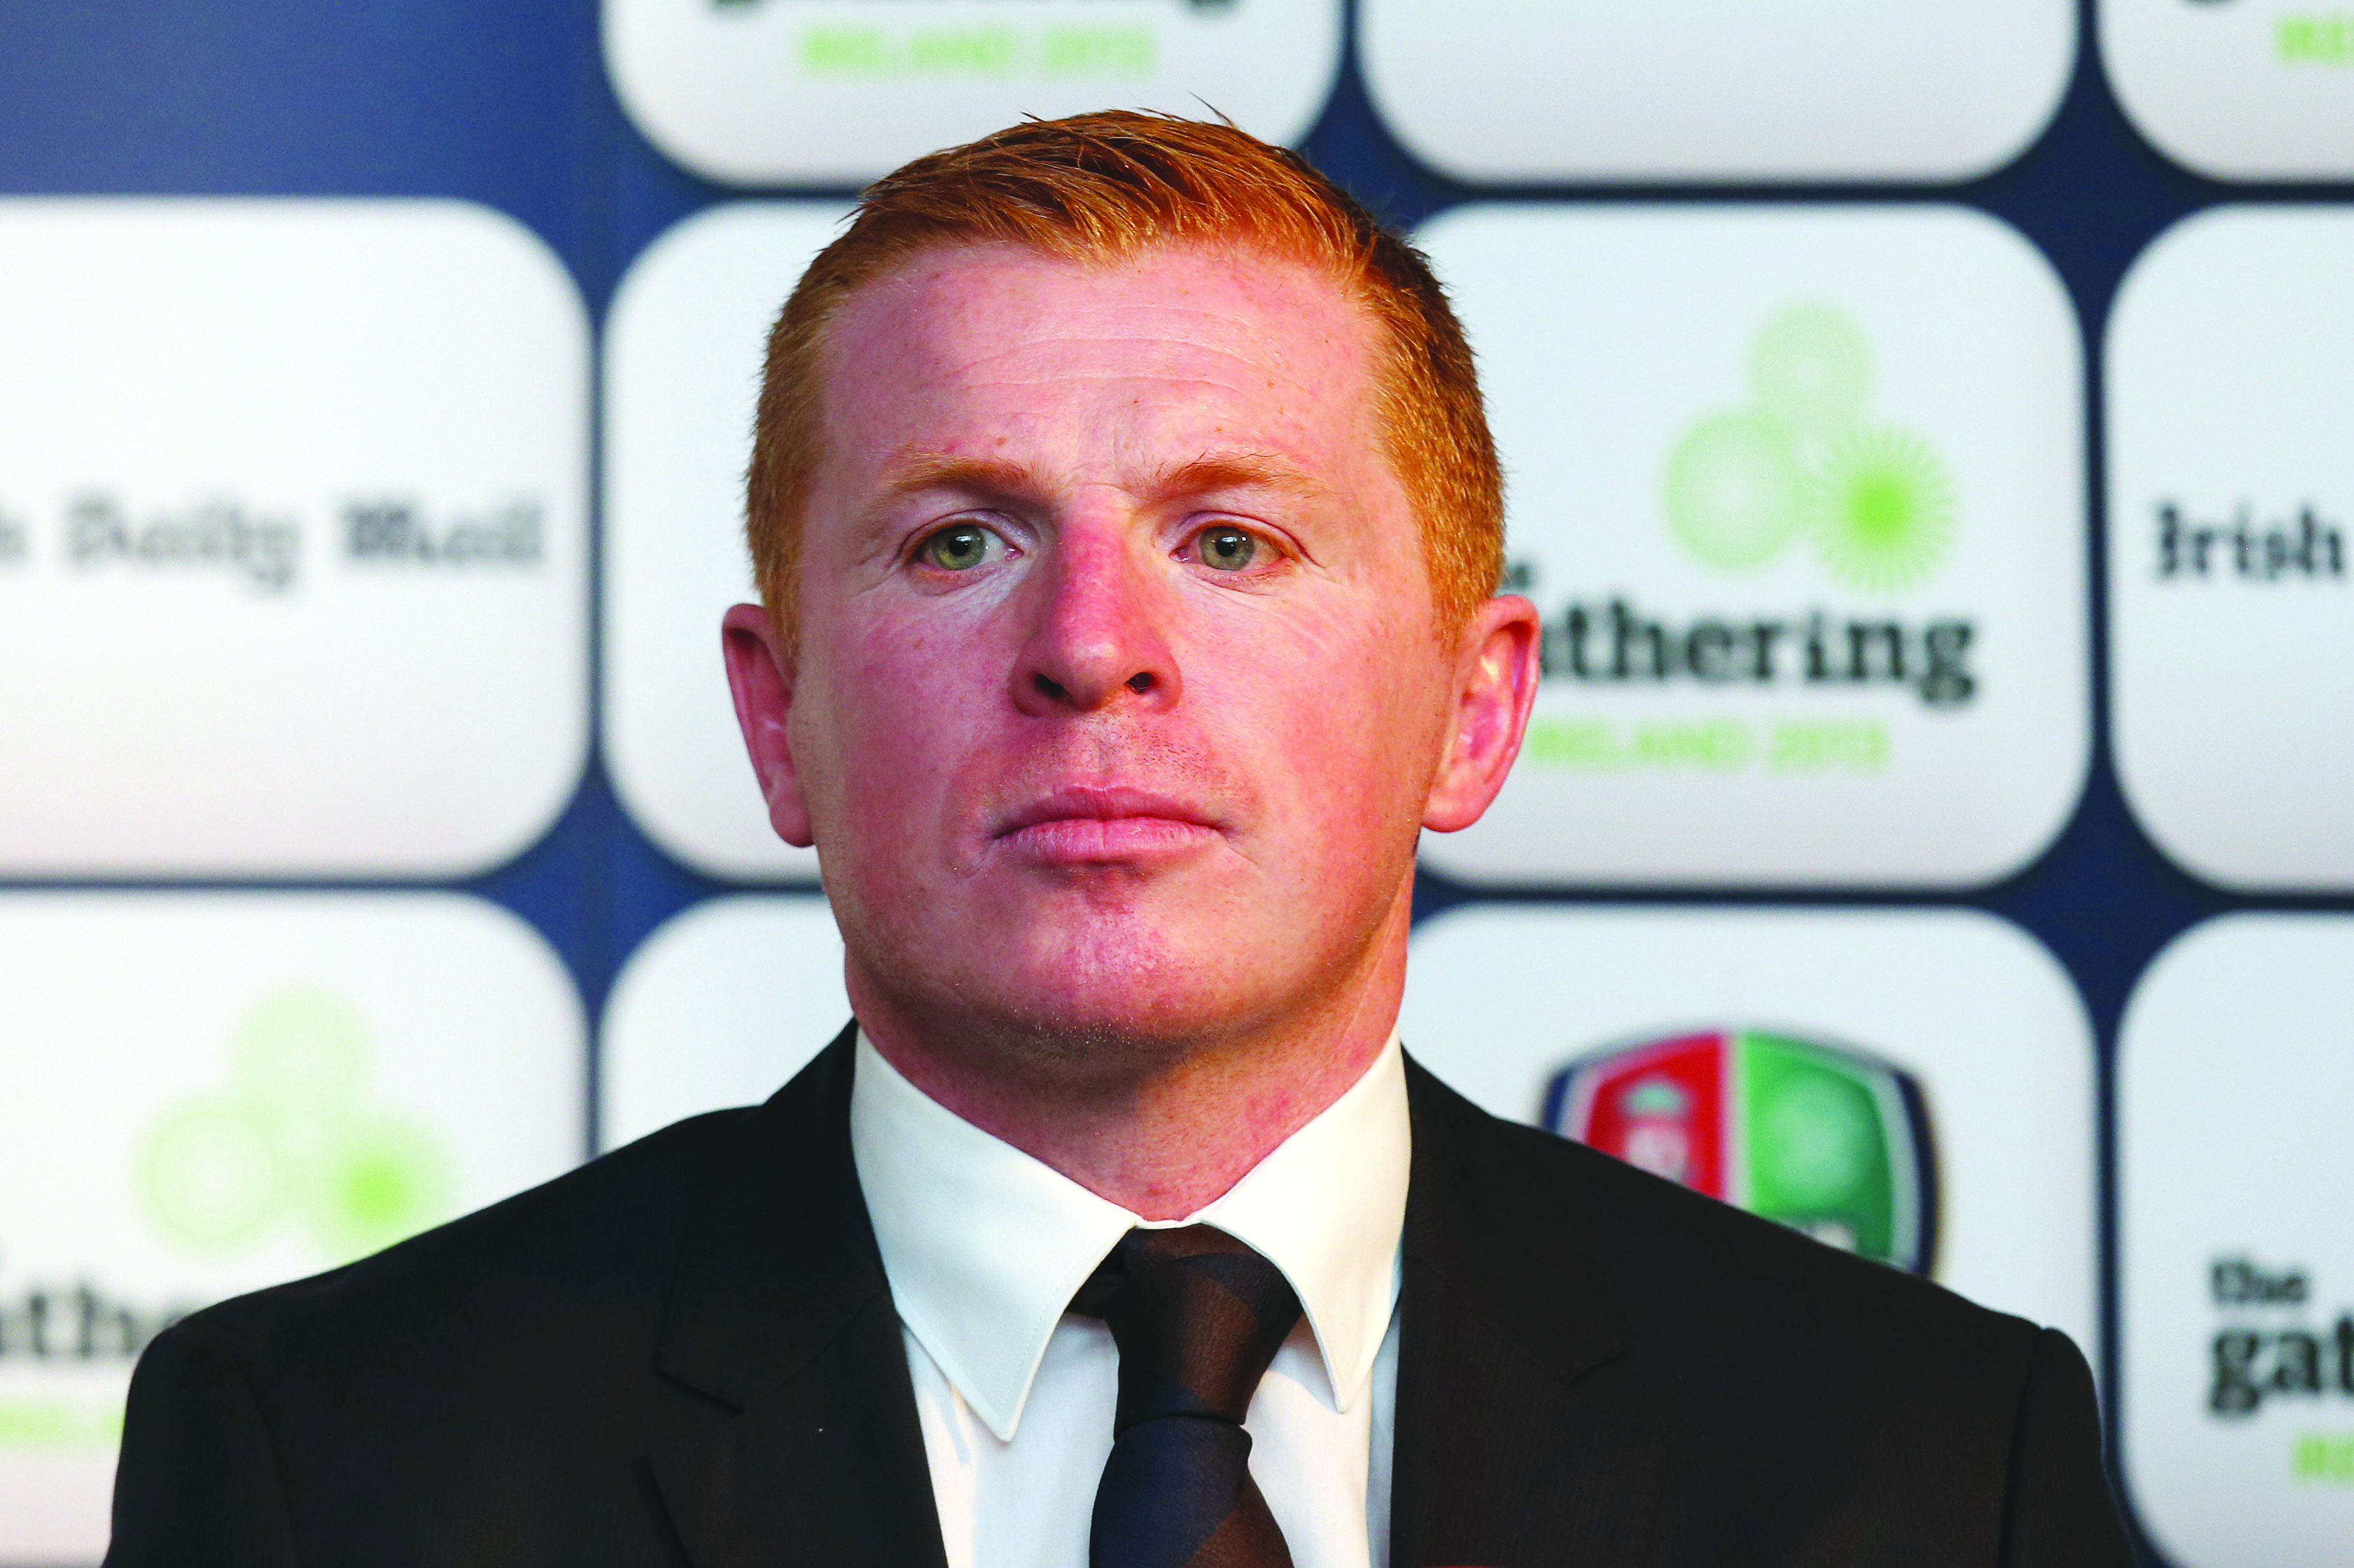 Despite yet another disastrous defeat, this time at home to St Mirren, Neil Lennon refuses to step down as Celtic manager